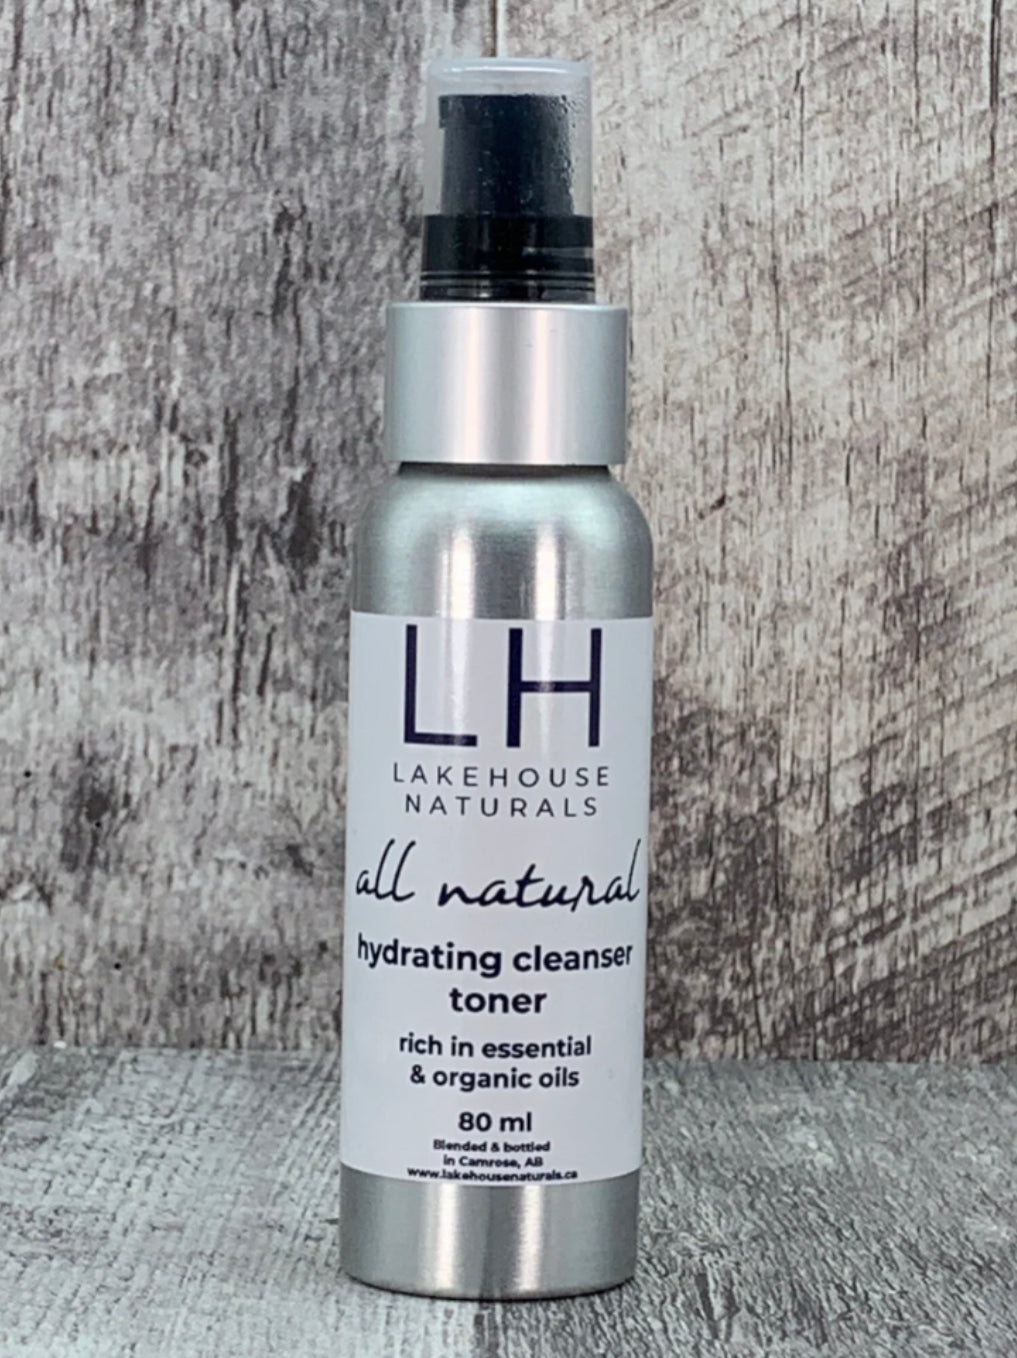 Lakehouse Hydrating Cleanser Toner